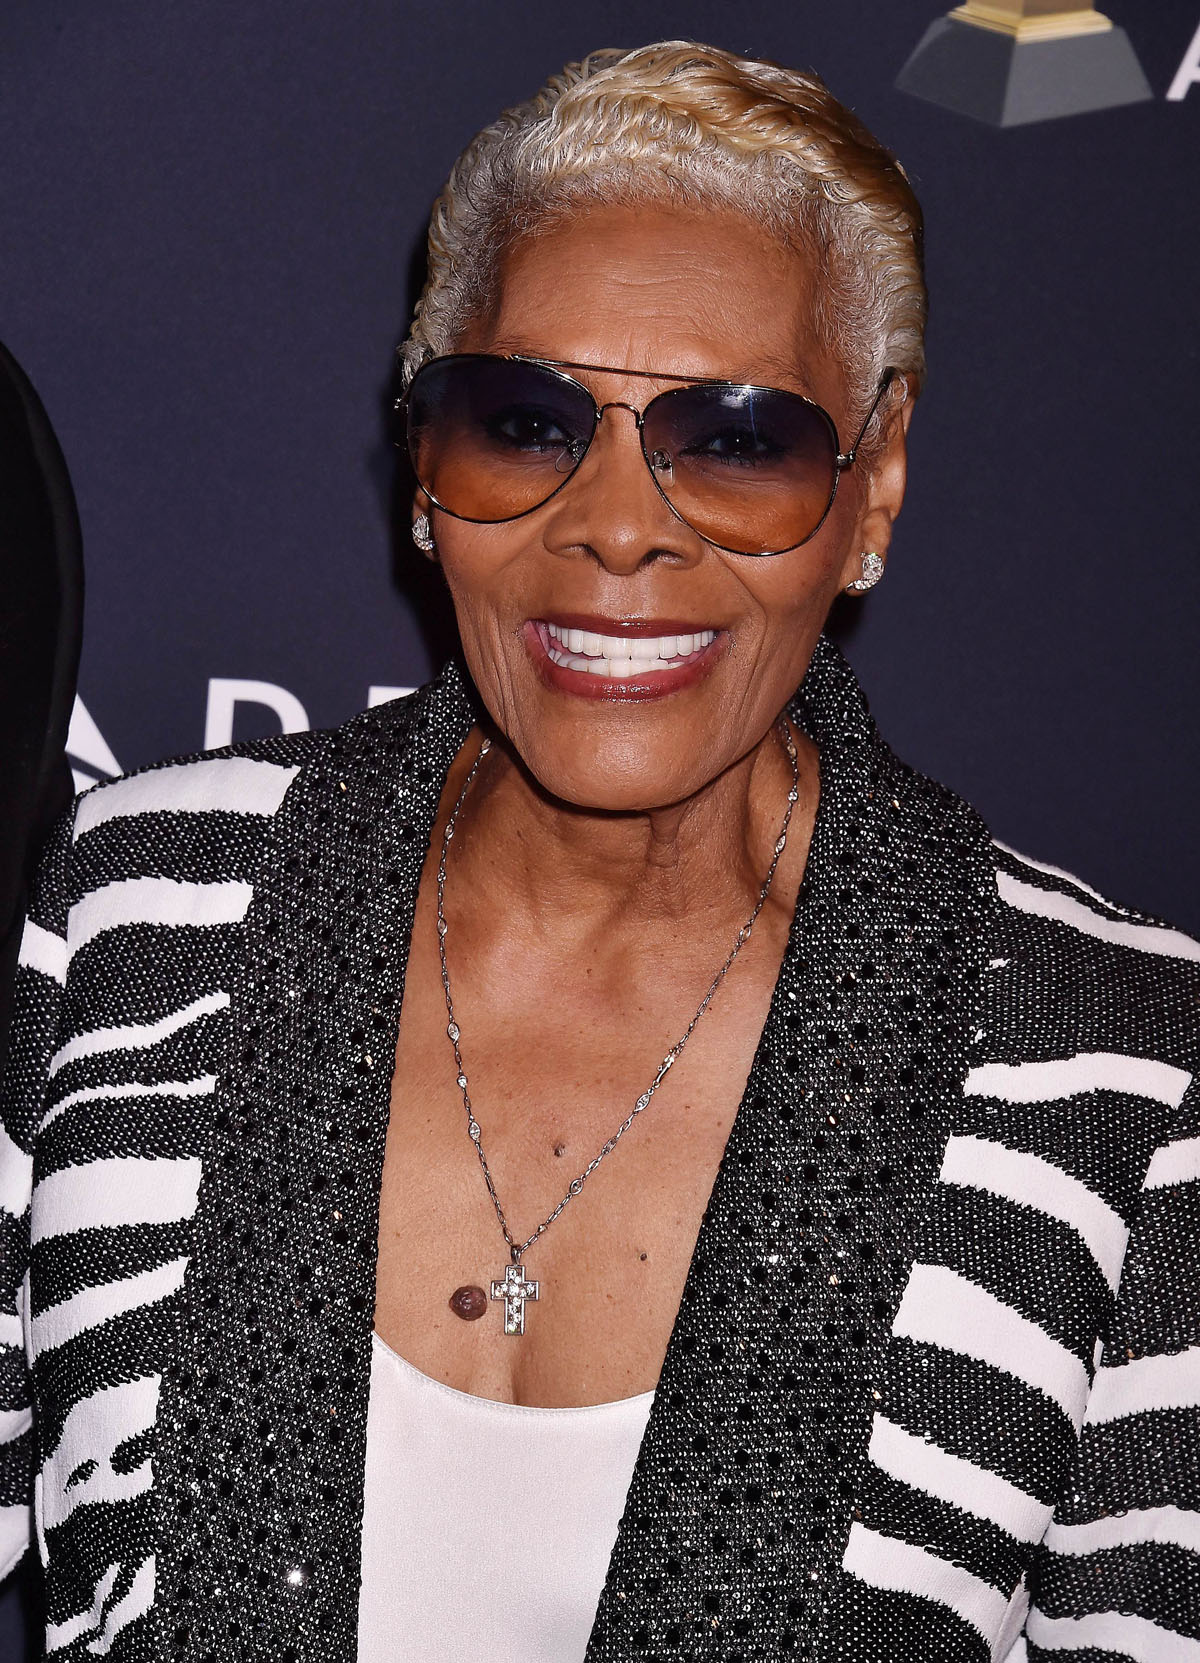 Dionne Warwick at the Pre-GRAMMY Gala and GRAMMY Salute to Industry Icons Honoring Sean "Diddy" Combs